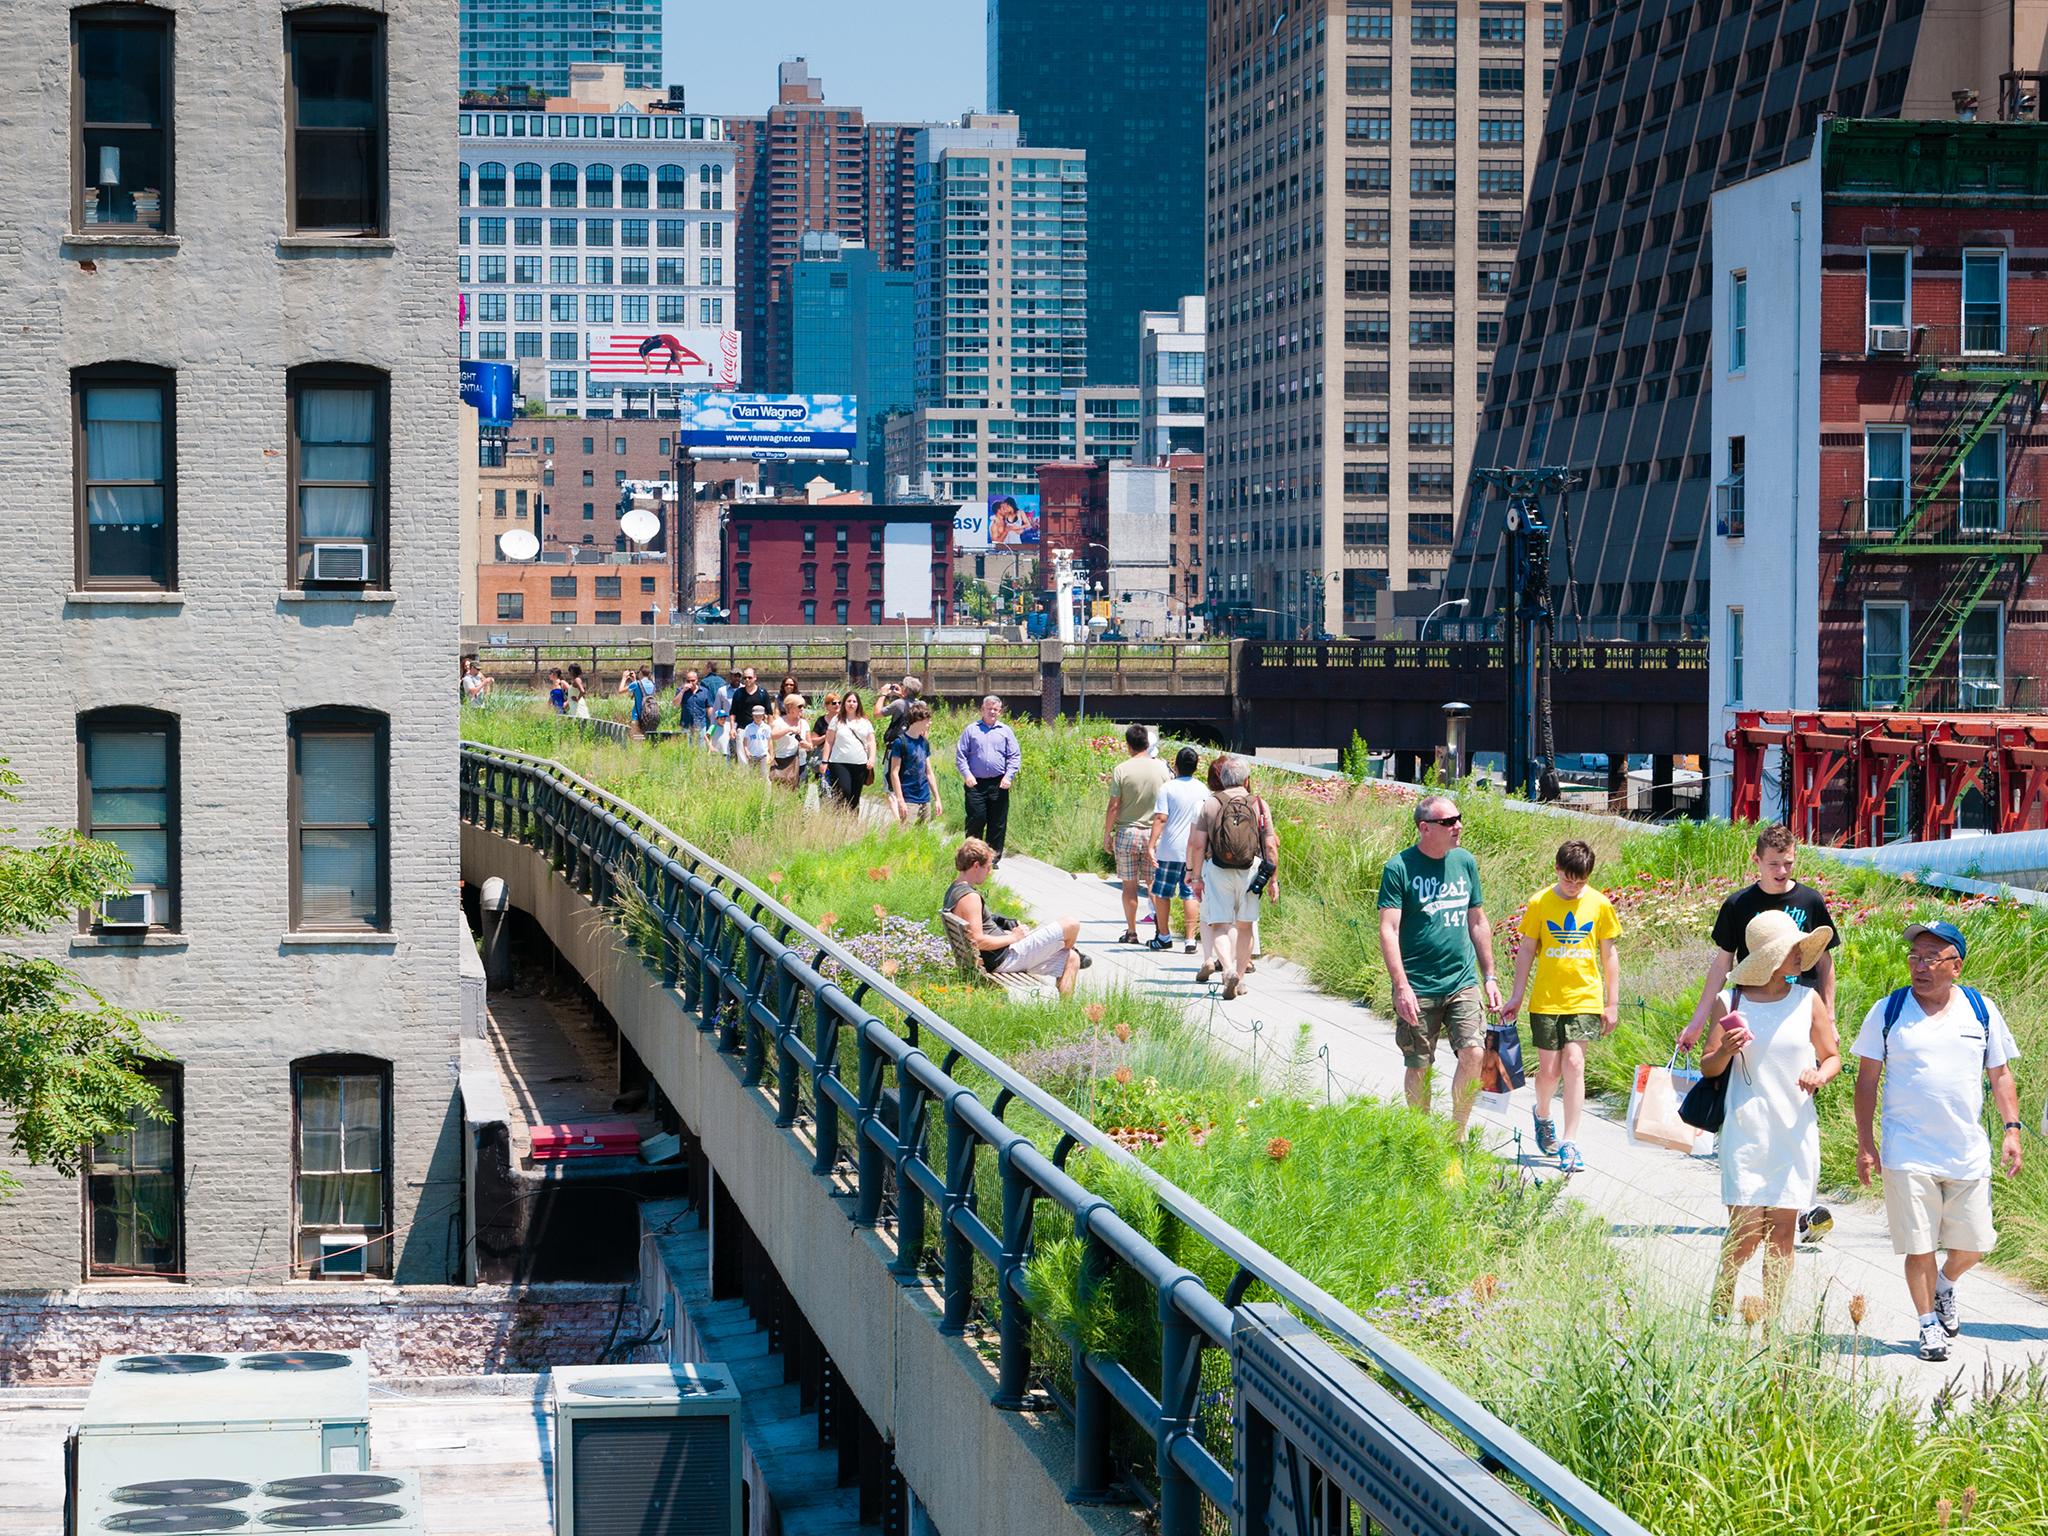 New York's High Line set a high water mark for public space design